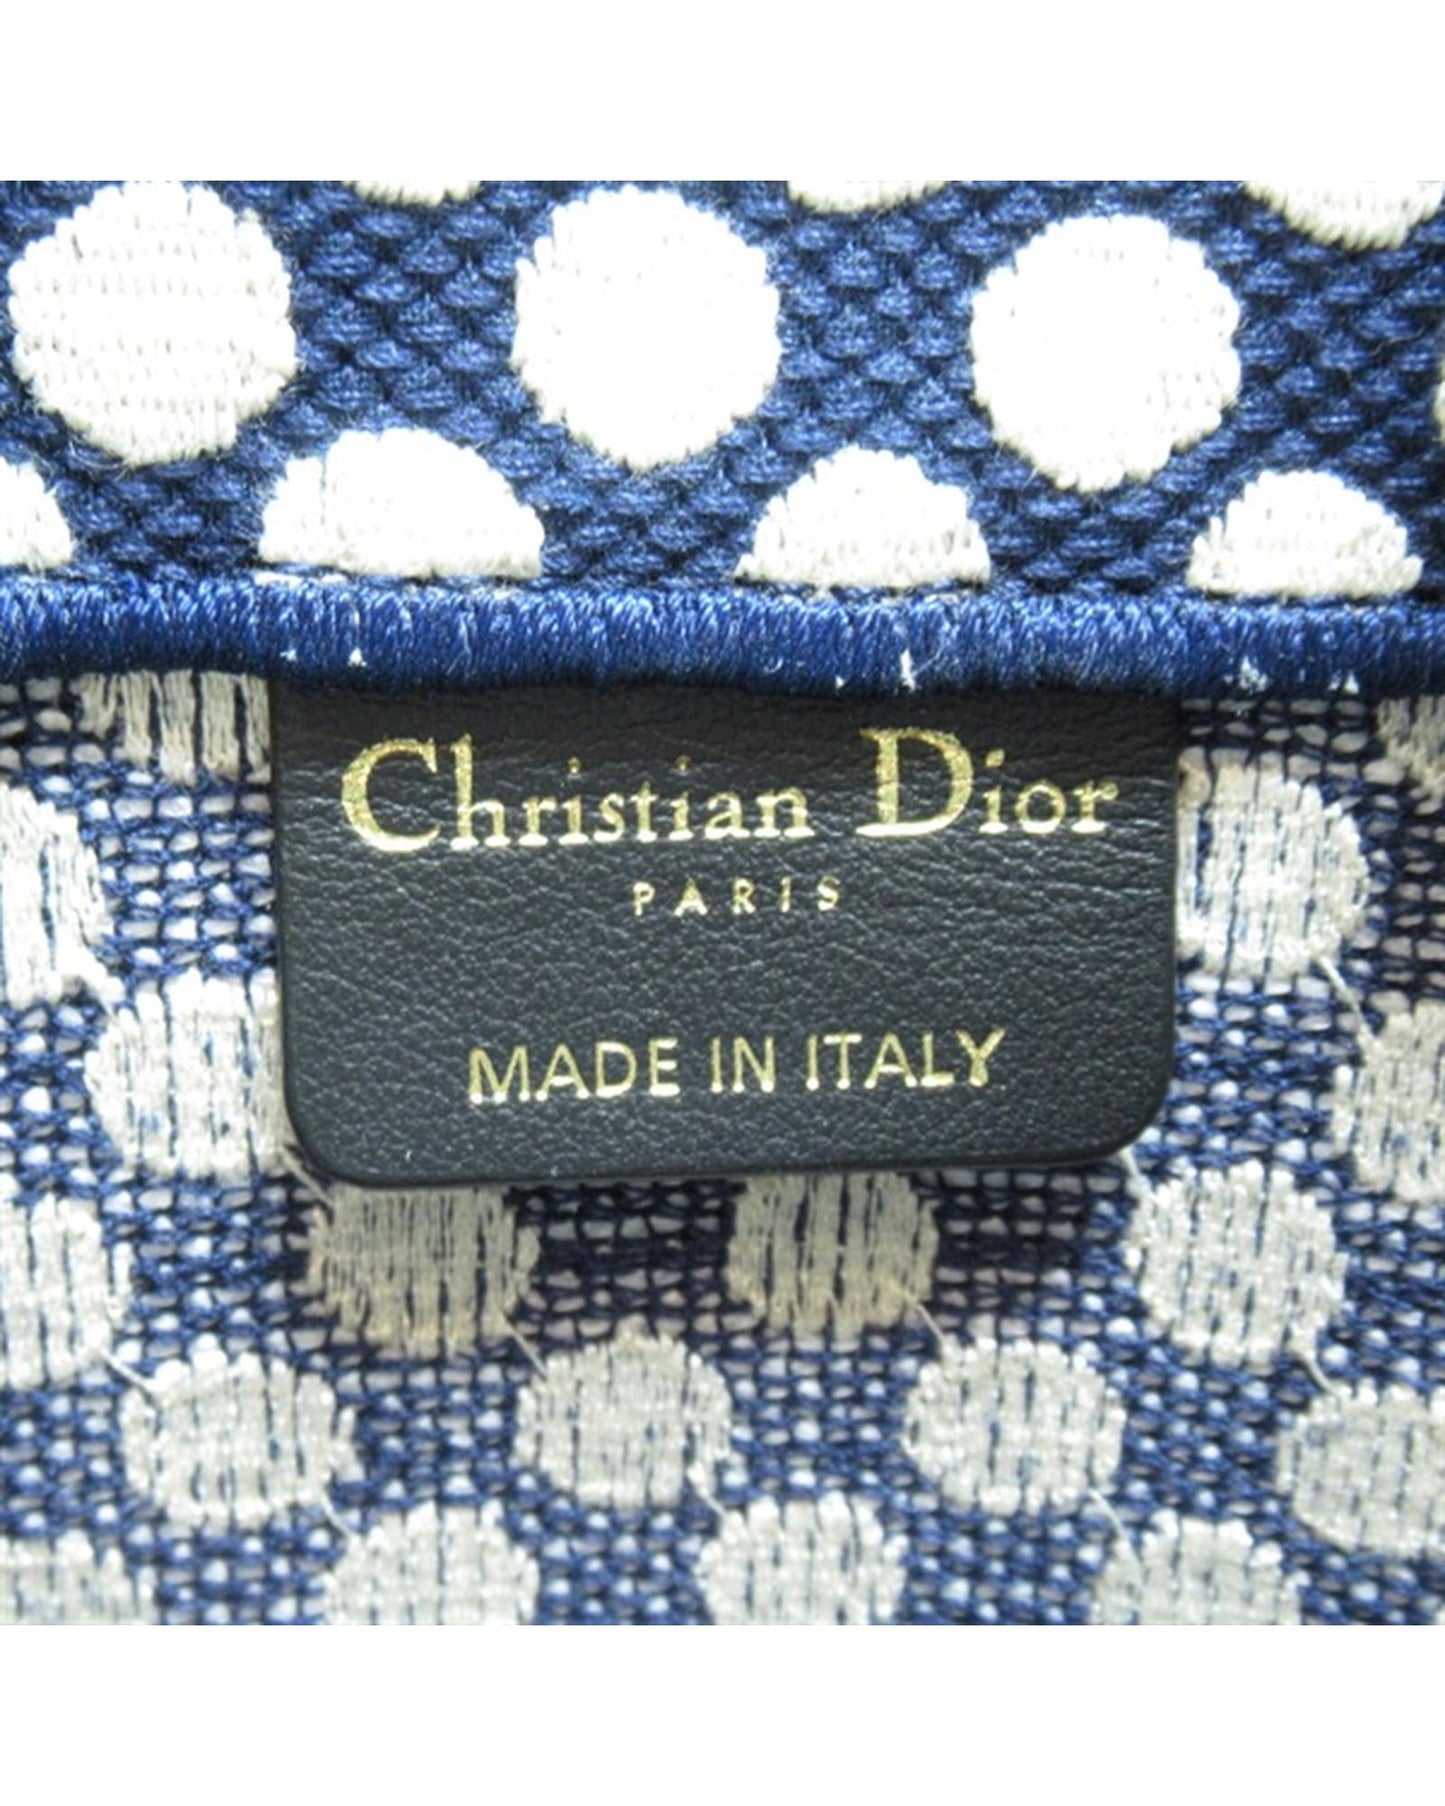 Dior Women's Small Canvas Book Tote Bag in Excellent Condition in Blue